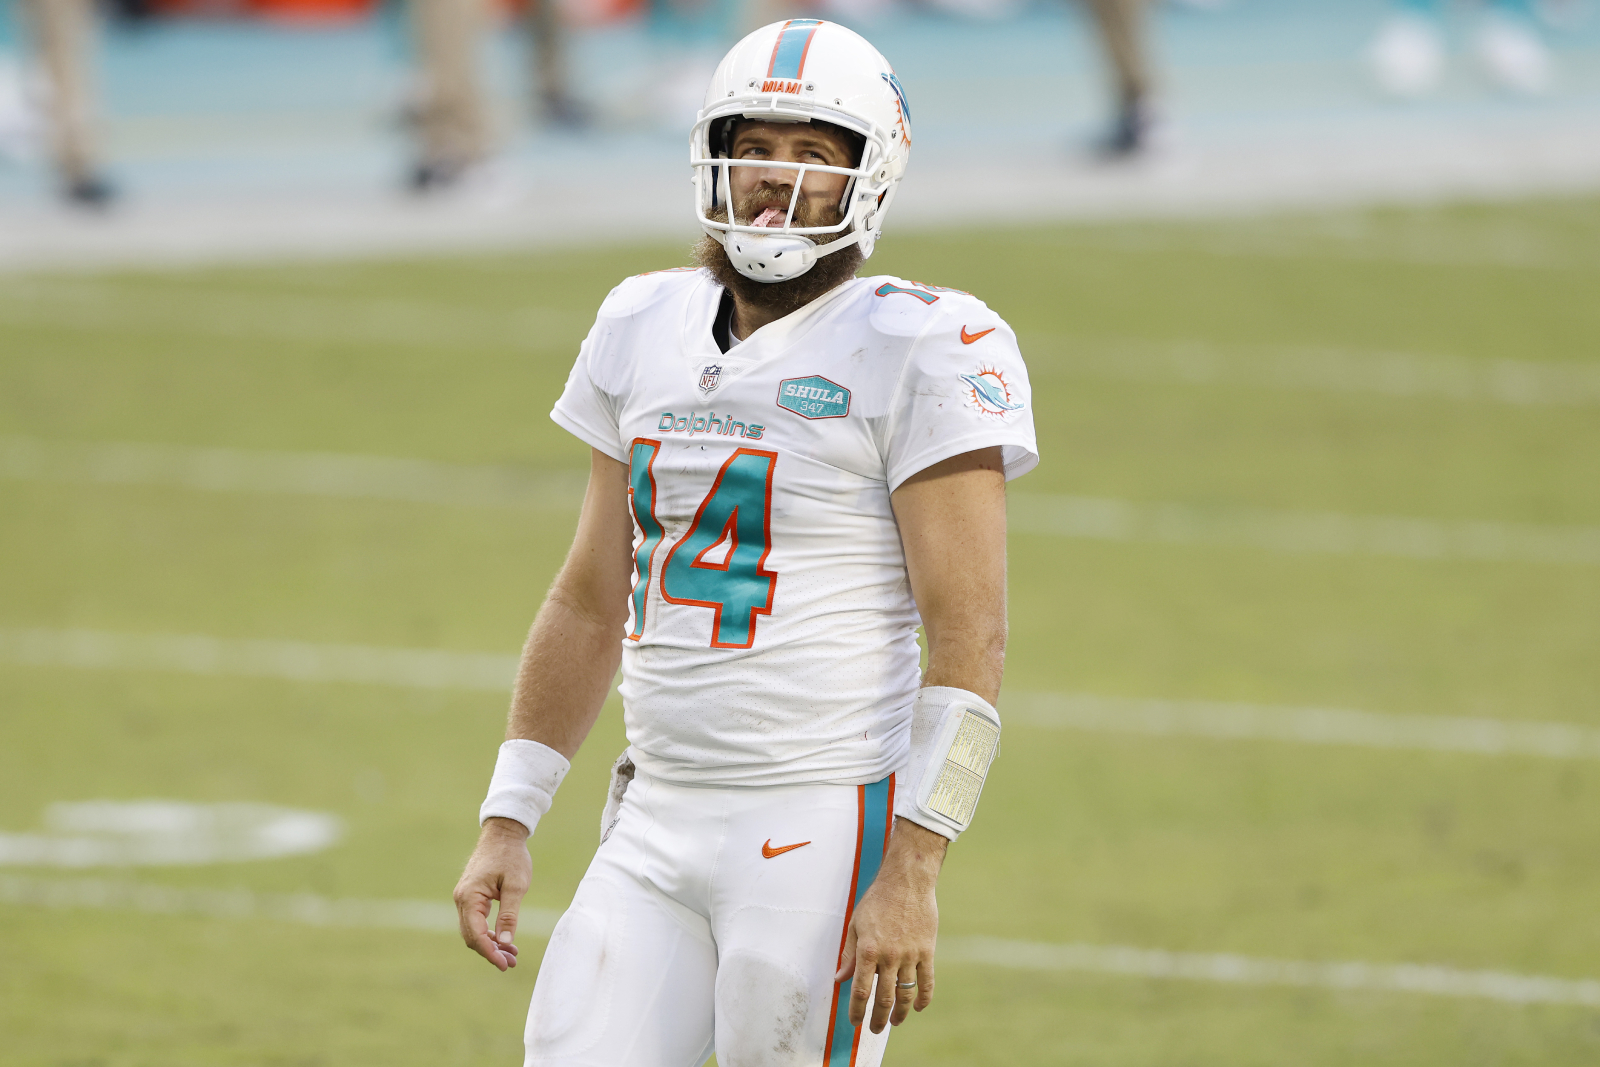 Ryan Fitzpatrick just got benched by the Miami Dolphins for Tua Tagovailoa, and he doesn't seem to be too happy about it.